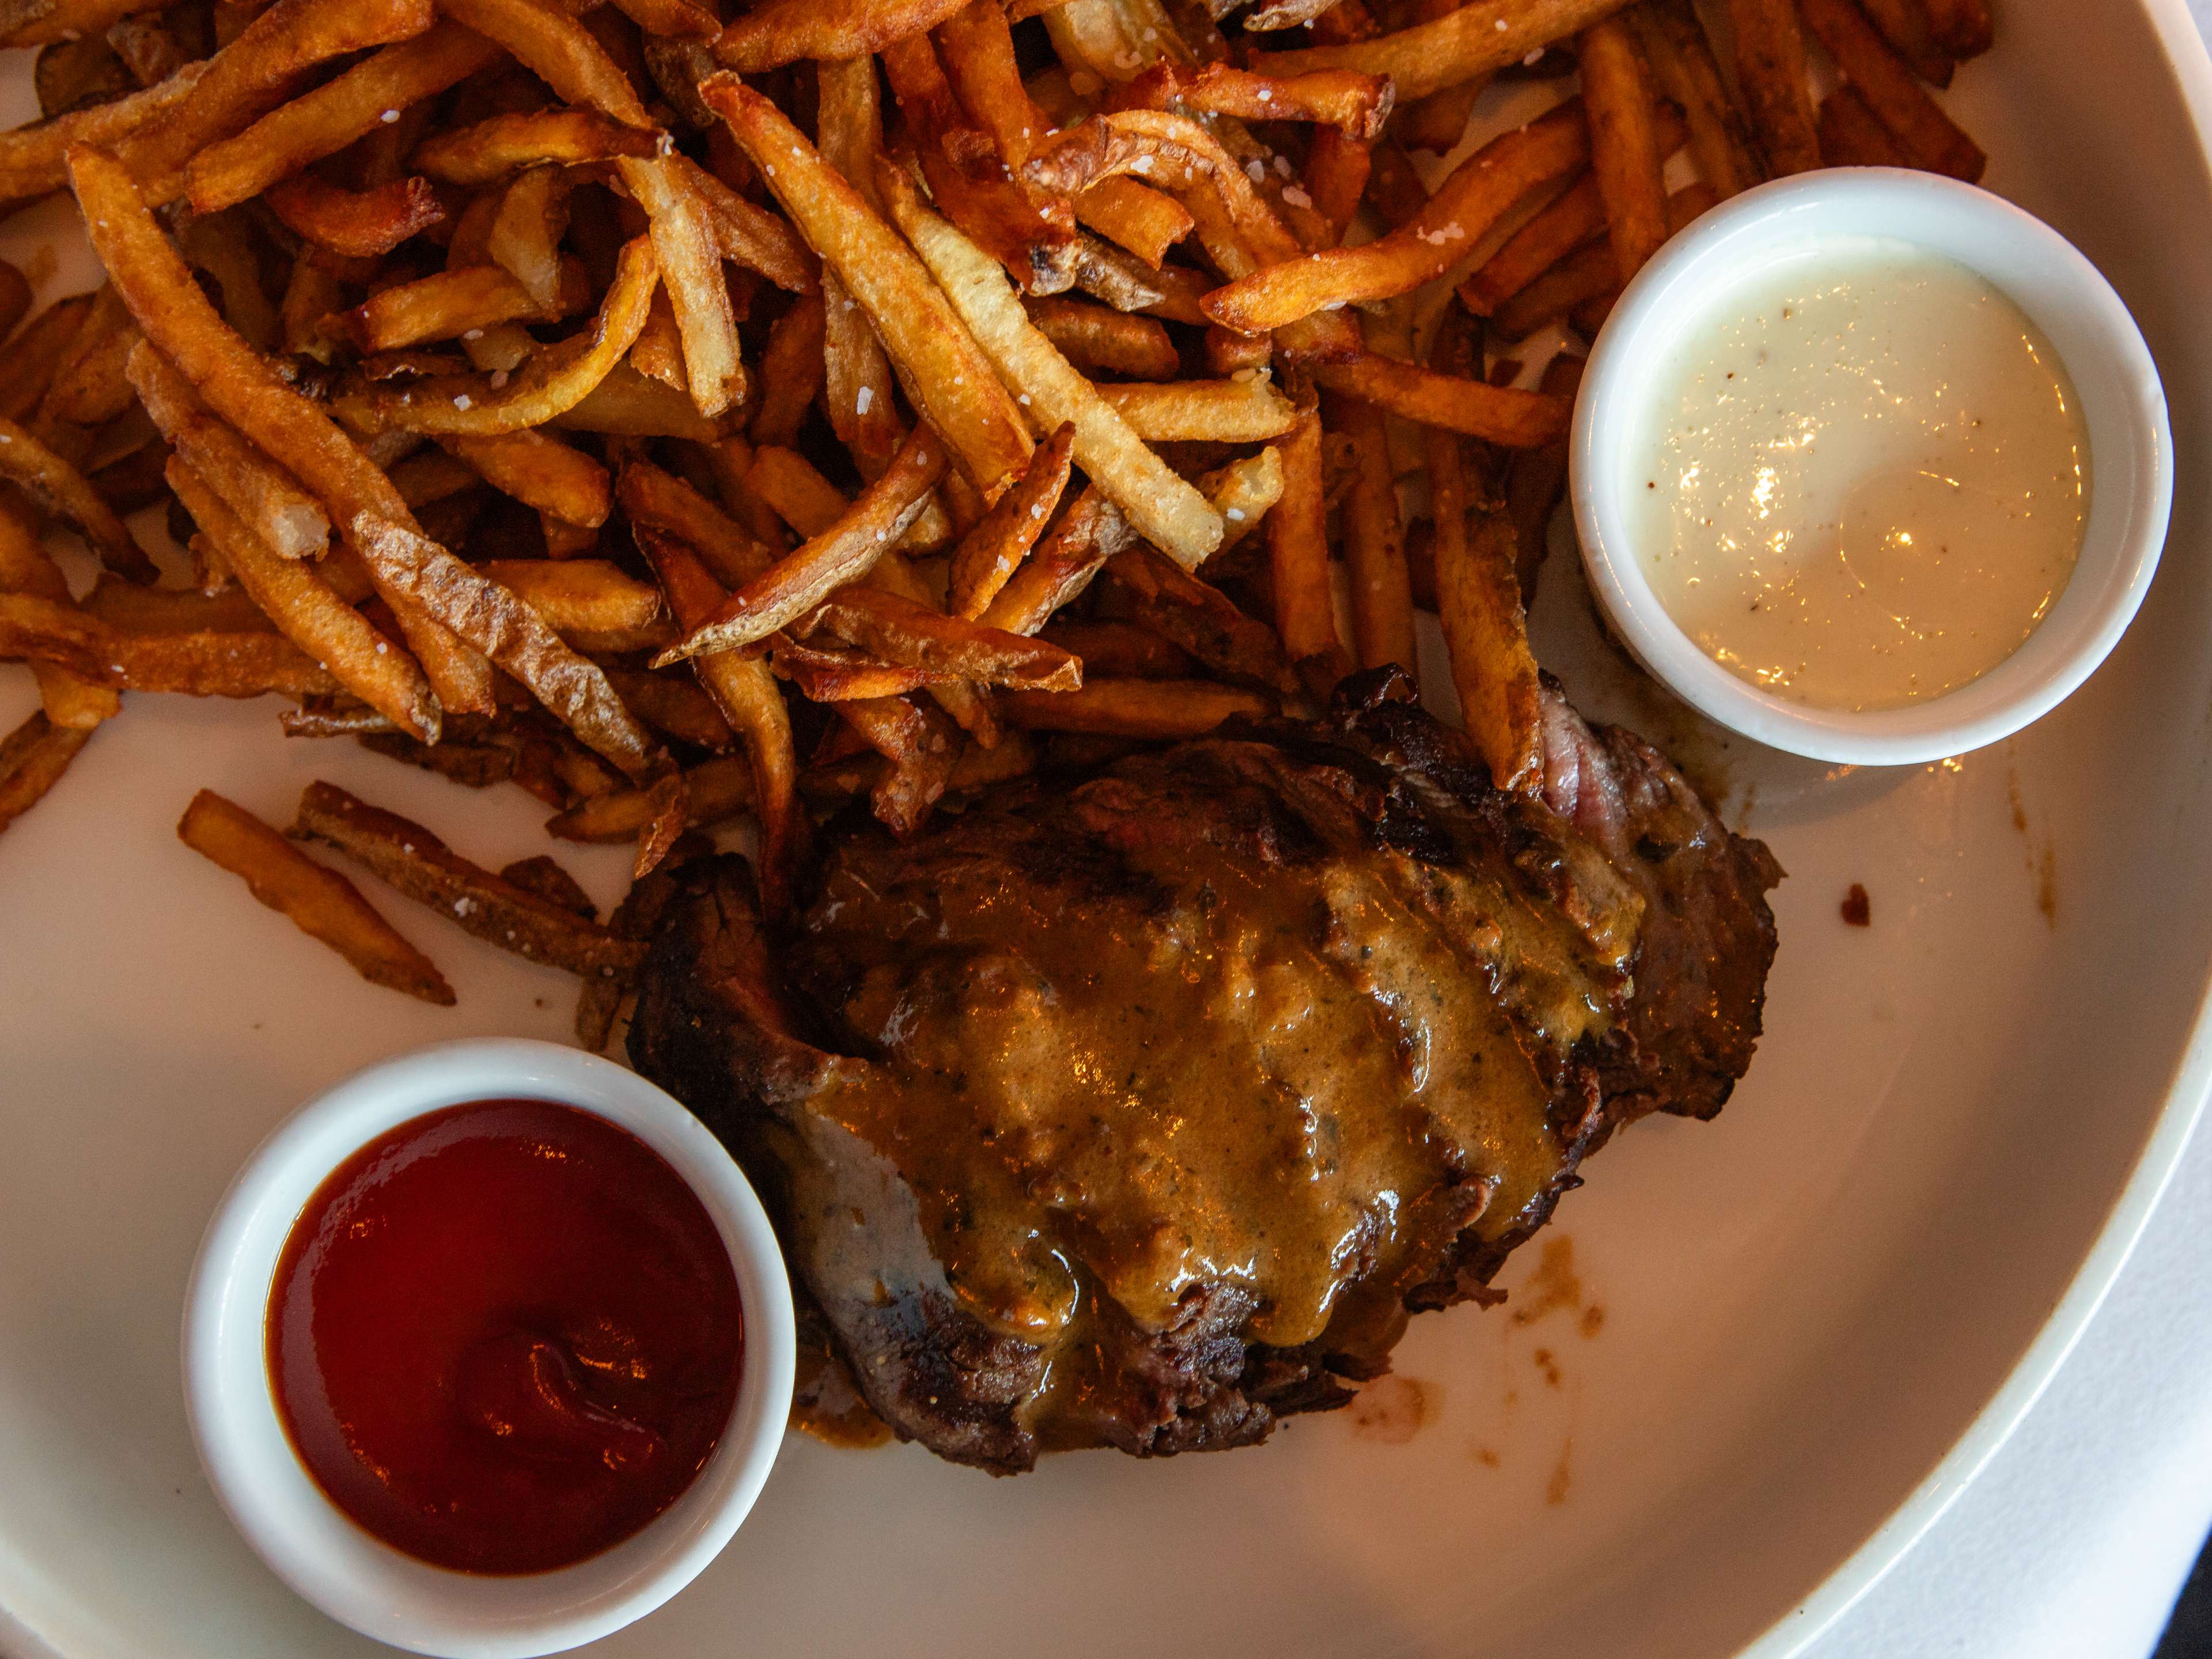 sliced beef filet covered in au poivre next to ramekins of mayonnaise, ketchup, and a mound of crispy french fries